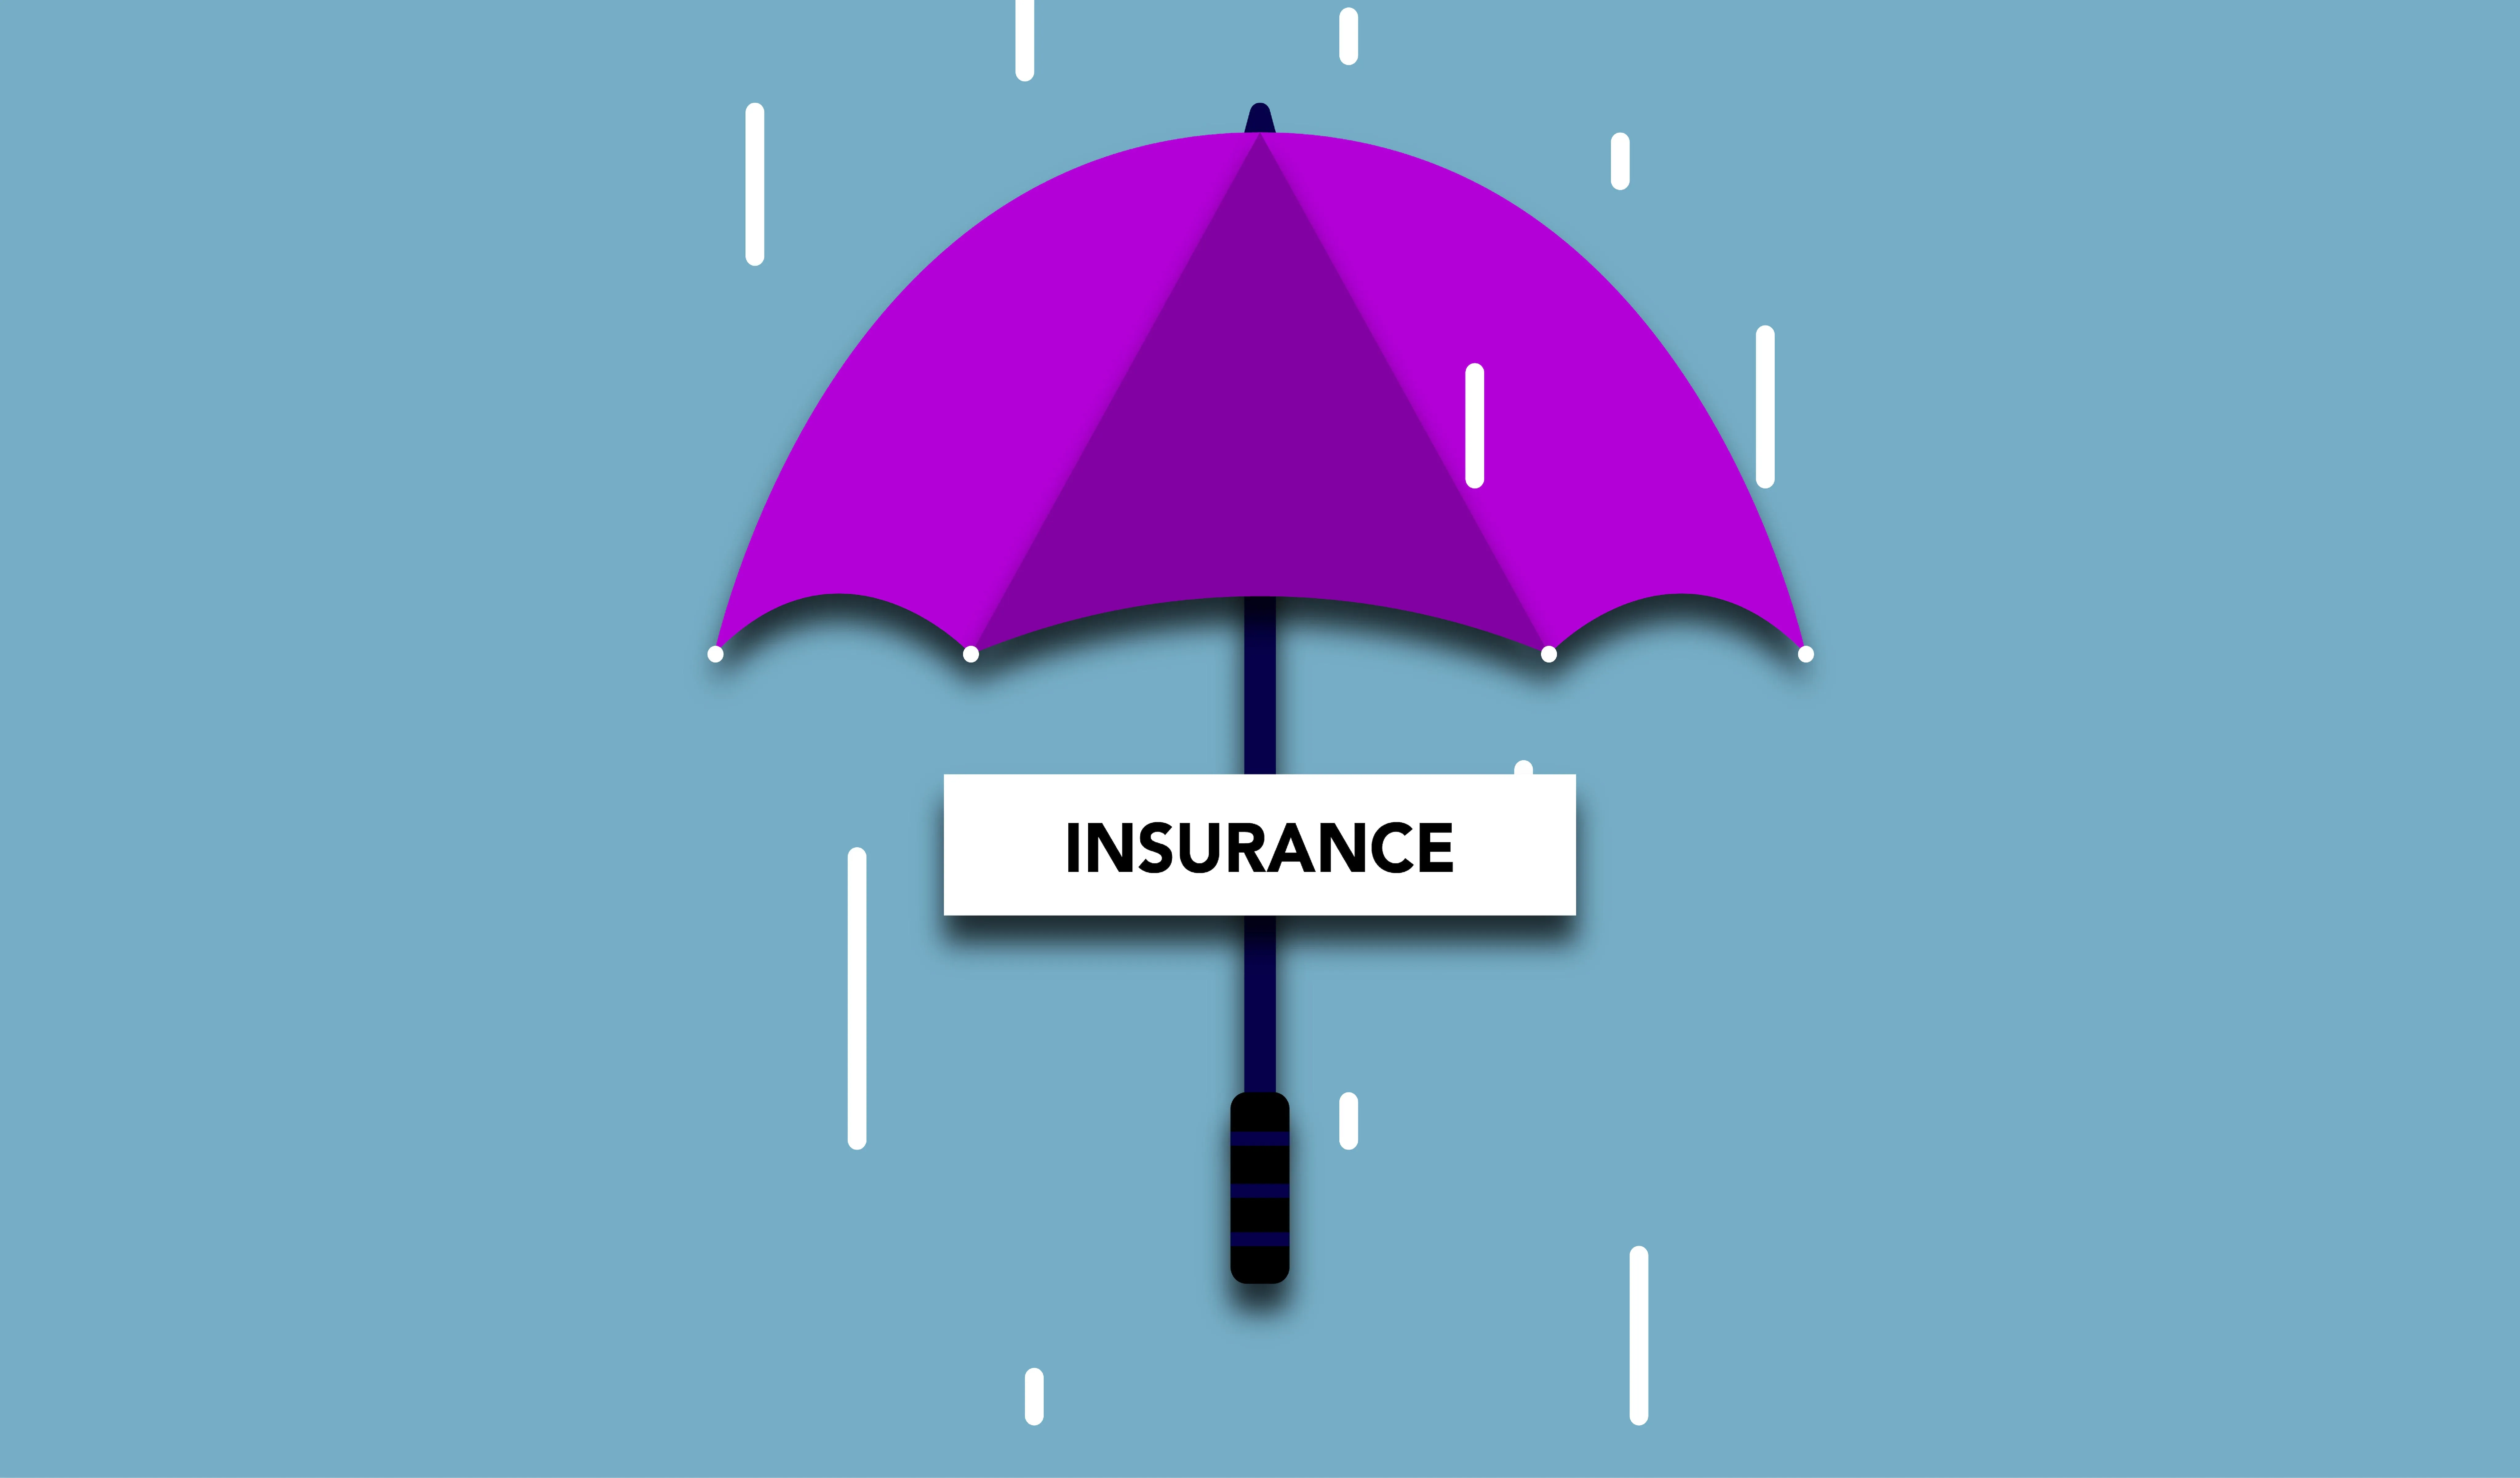 What You Need to Know About Umbrella Insurance